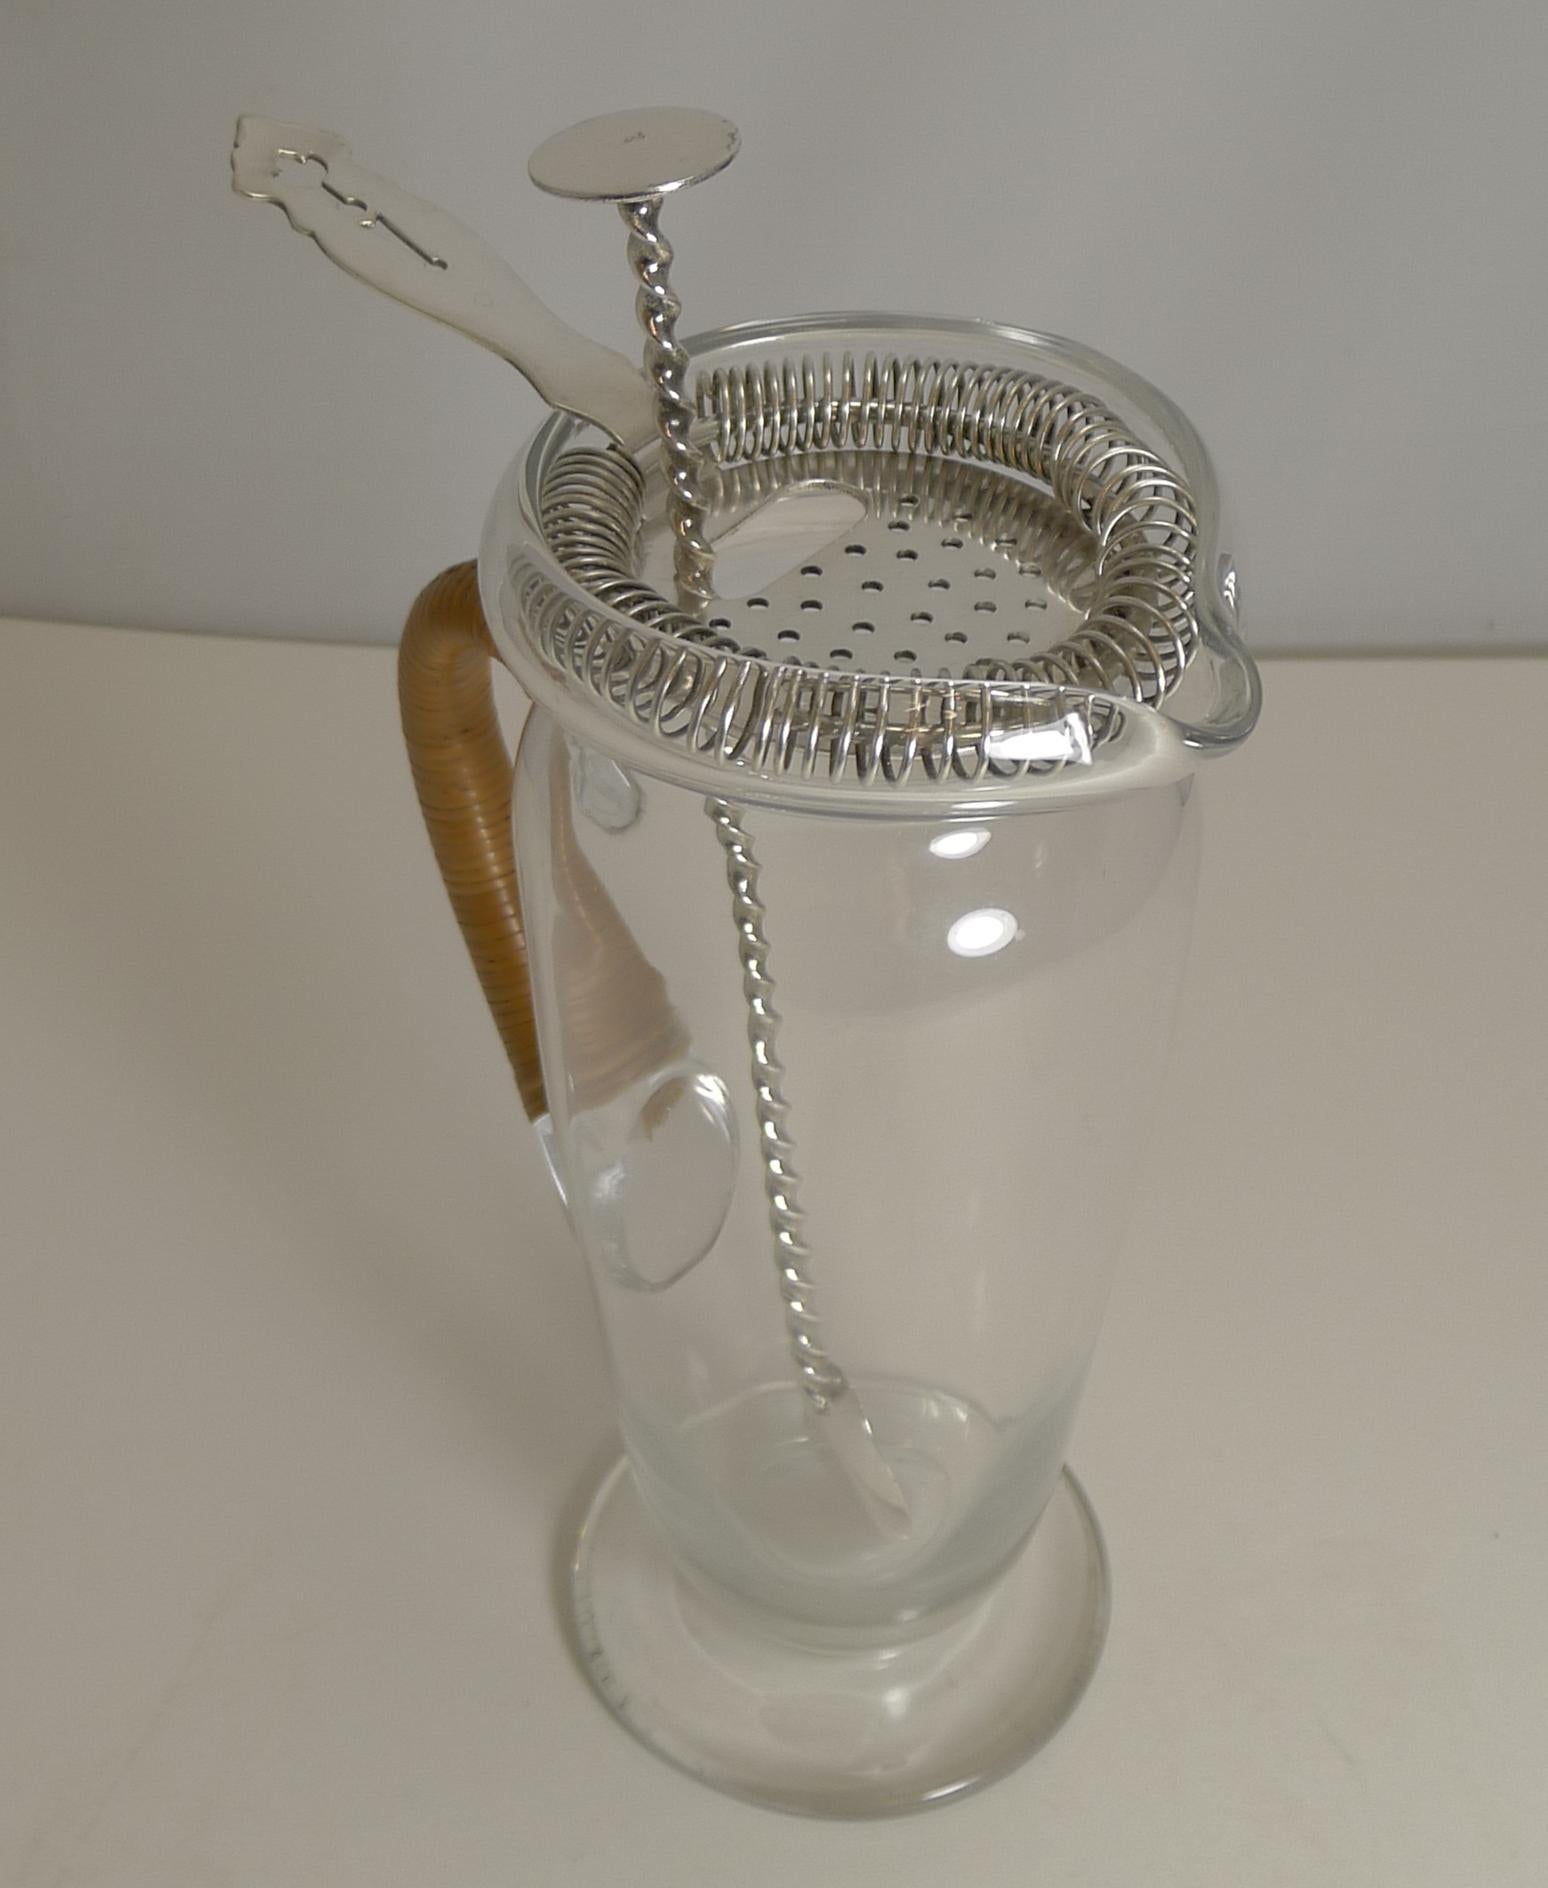 A smart 1930s glass and silver plated Martini / Cocktail mixing jug or pitcher with a cane wrapped handle.

The jug comes complete with the original strainer and mixing spoon. The strainer is signed by the creme de la creme of silversmith's,